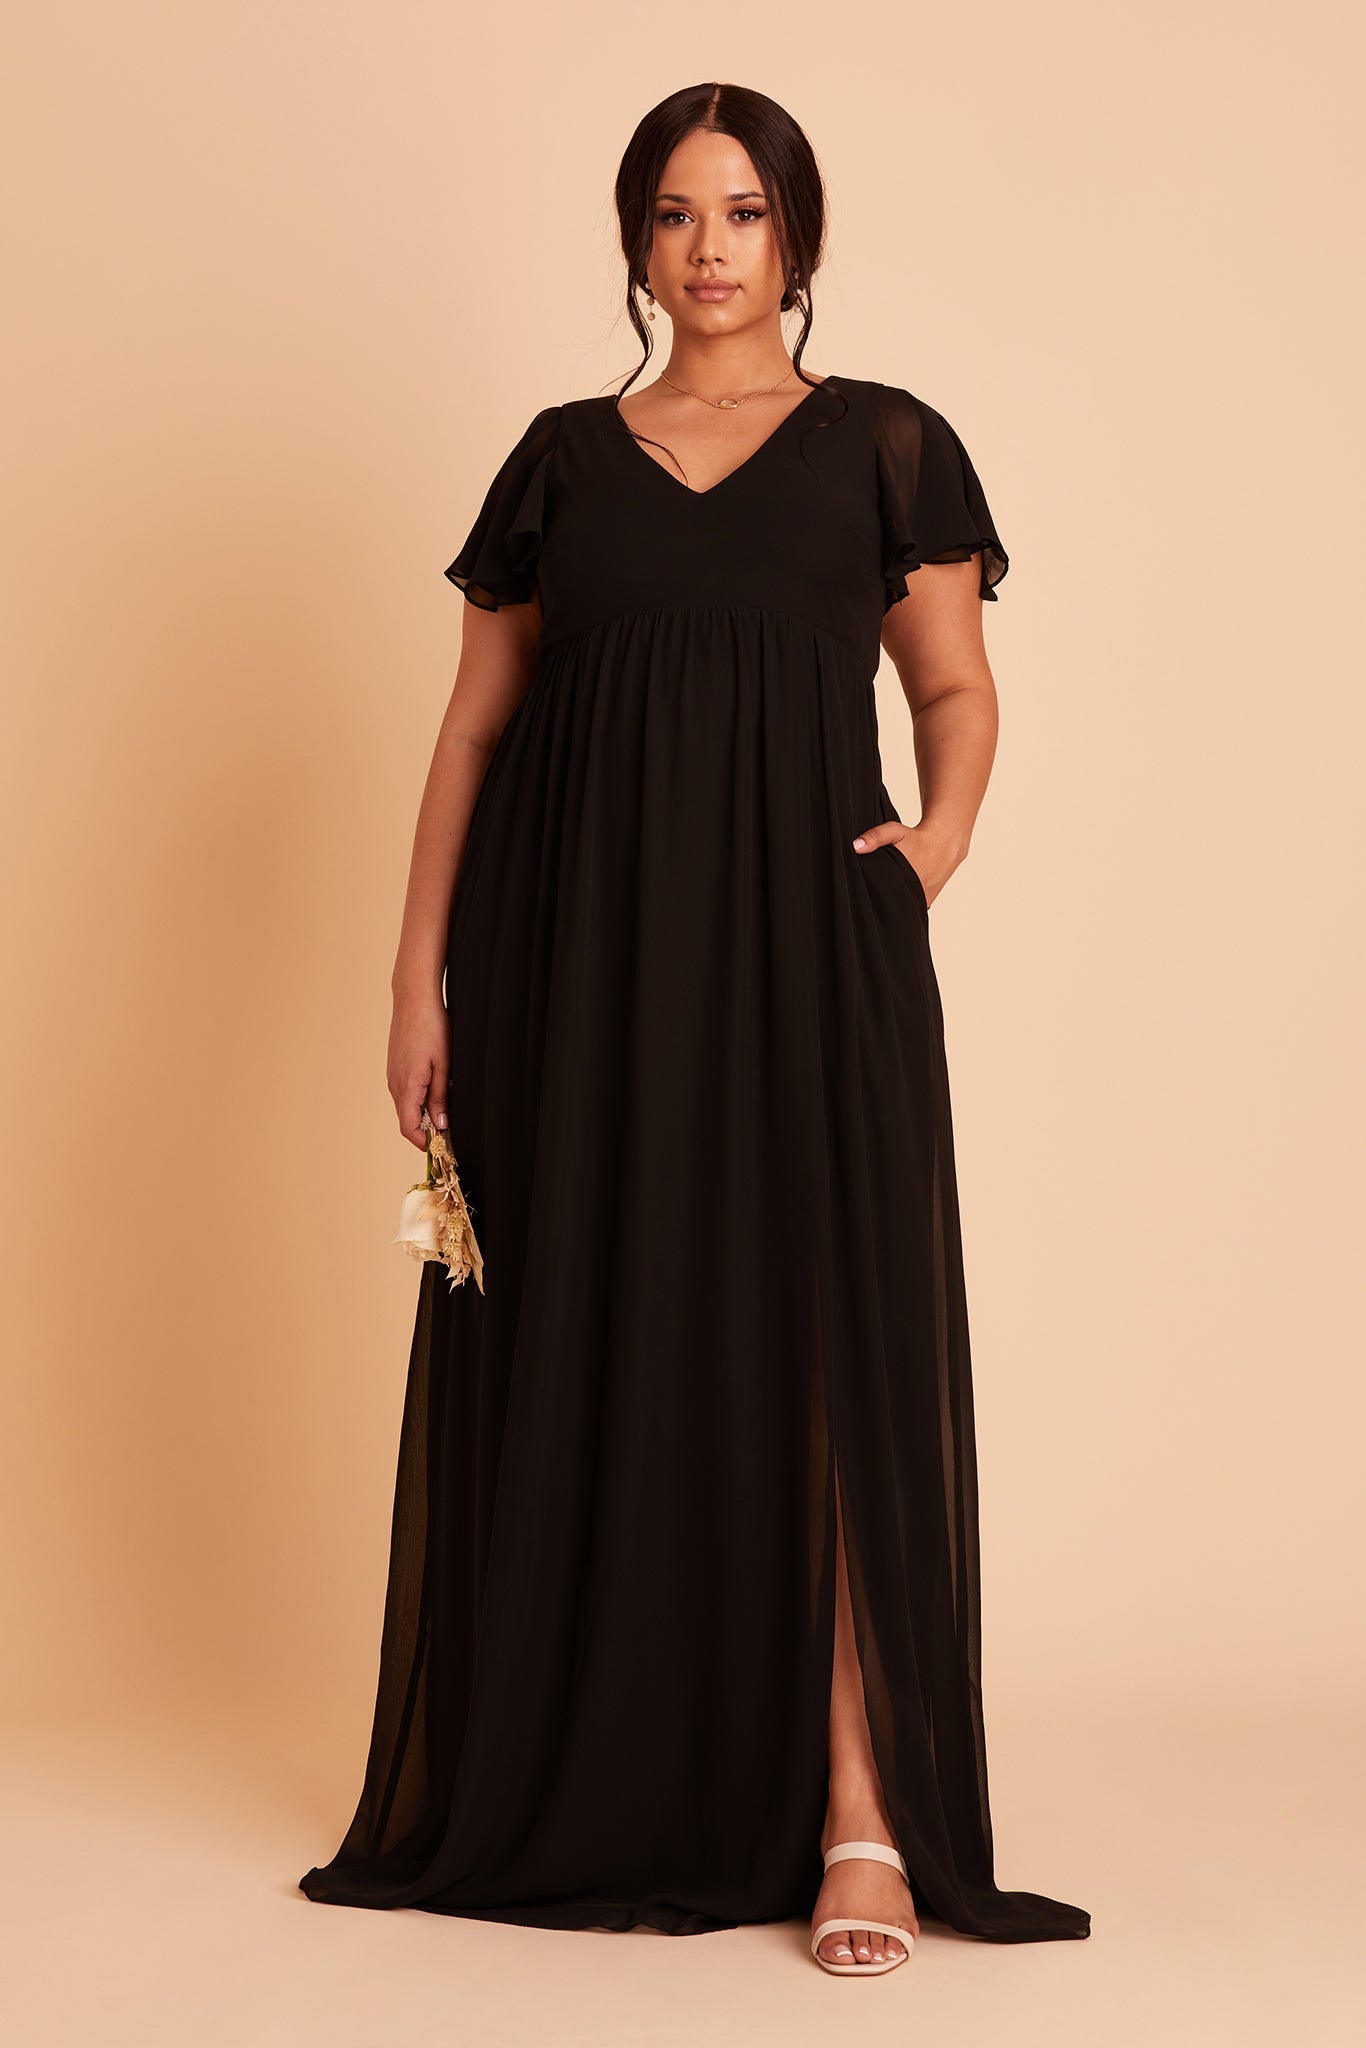 Hannah empire plus size bridesmaid dress in black chiffon by Birdy Grey, front view, hand in pocket